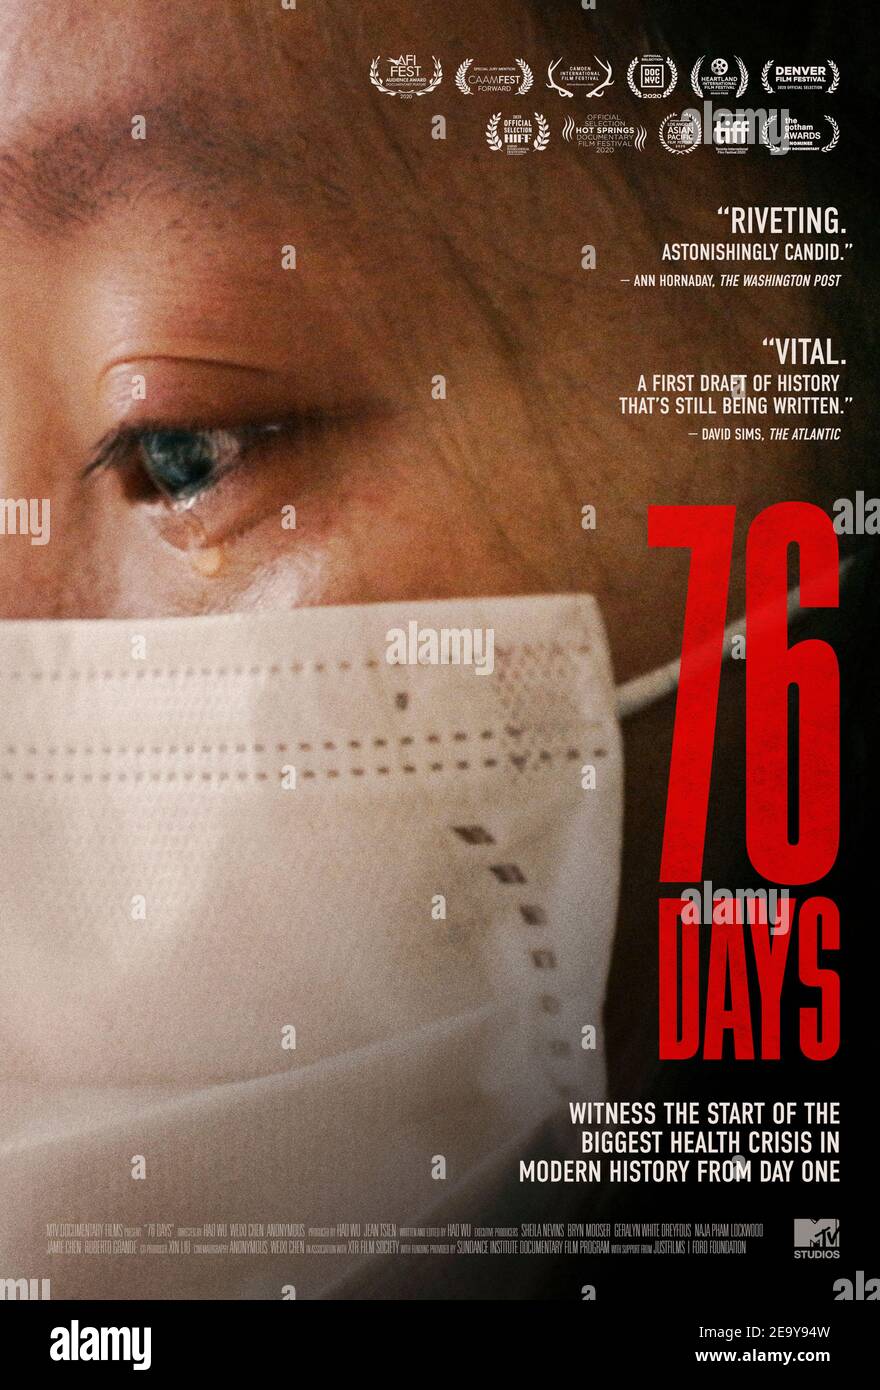 76 Days (2020) directed by Weixi Chen and Hao Wu and starring . Documentary about the patients and frontline medical professionals battling the COVID-19 pandemic during its first days in Wuhan, China. Stock Photo